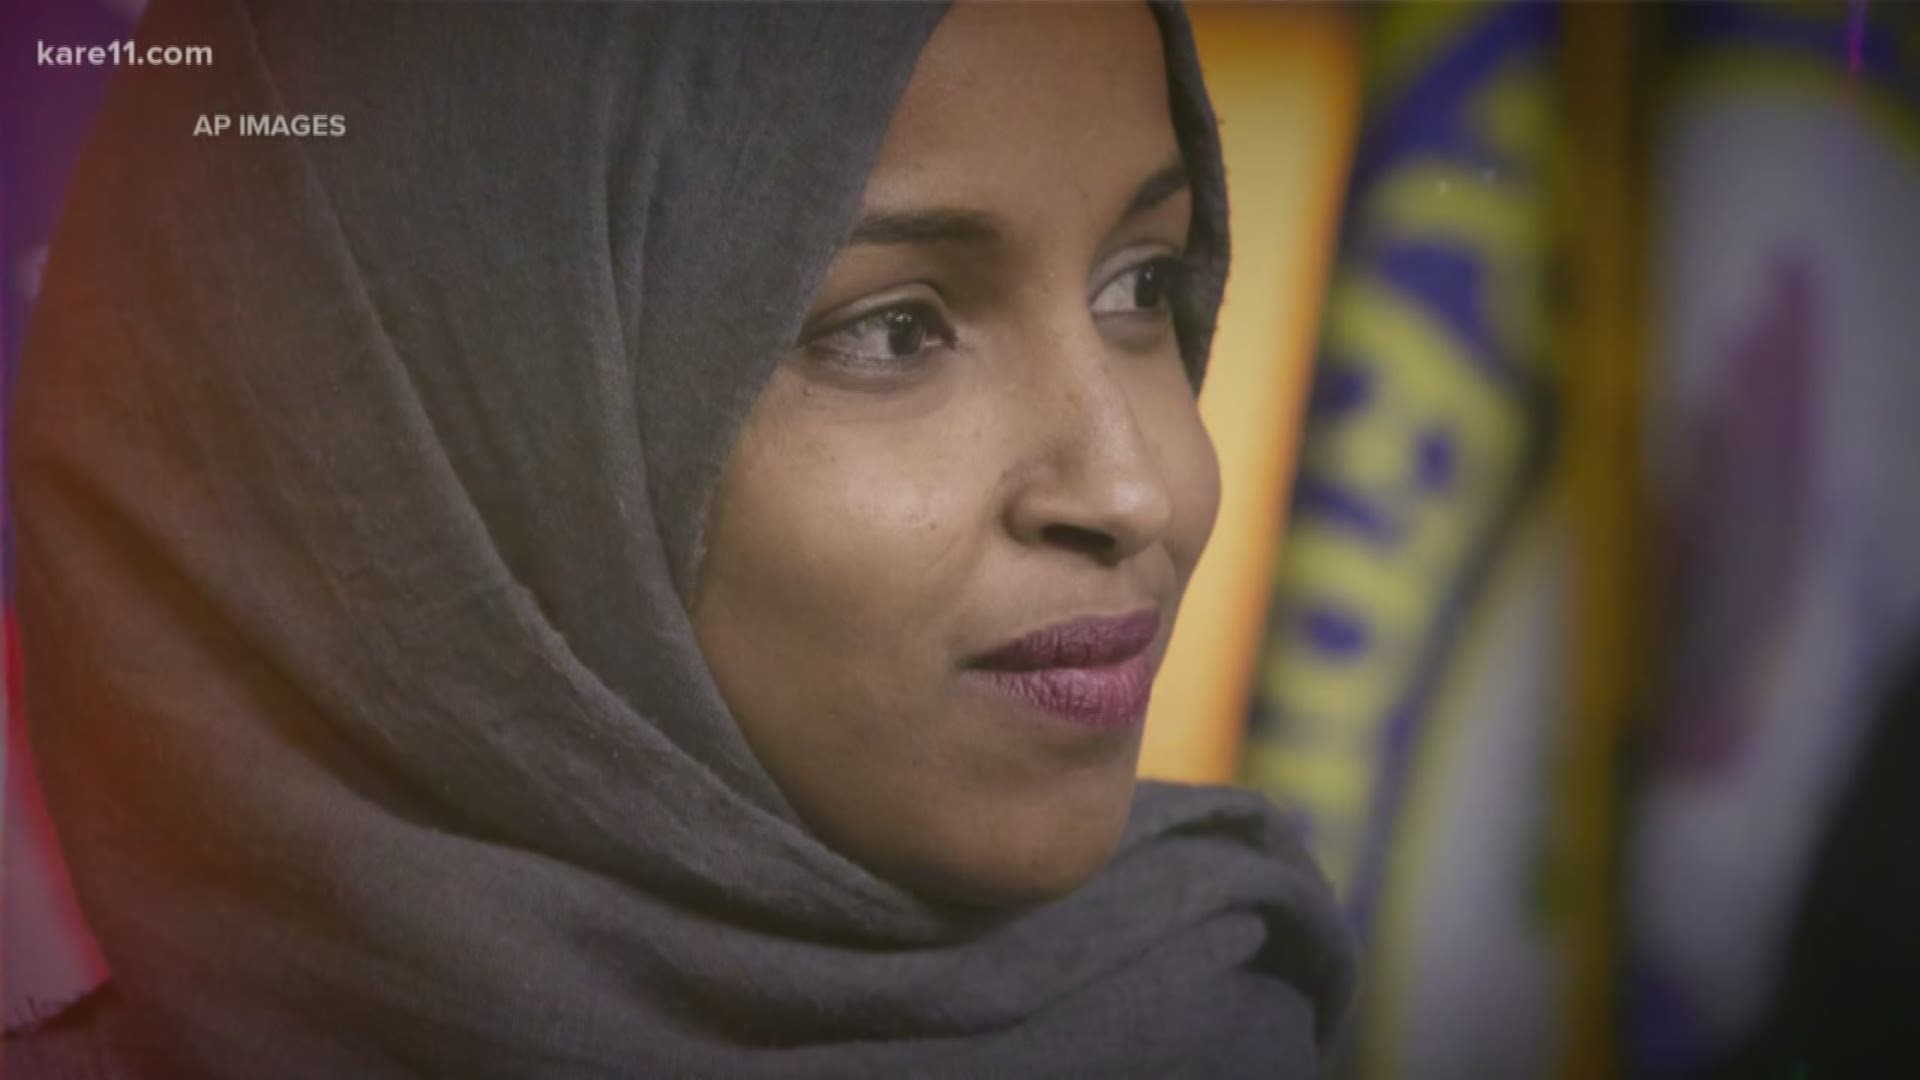 Rep. Ilhan Omar is apologizing for comments about Israel that Democratic leaders called "hurtful" and "offensive. Some are calling her remarks anti-Semitic. https://kare11.tv/2By0kj9